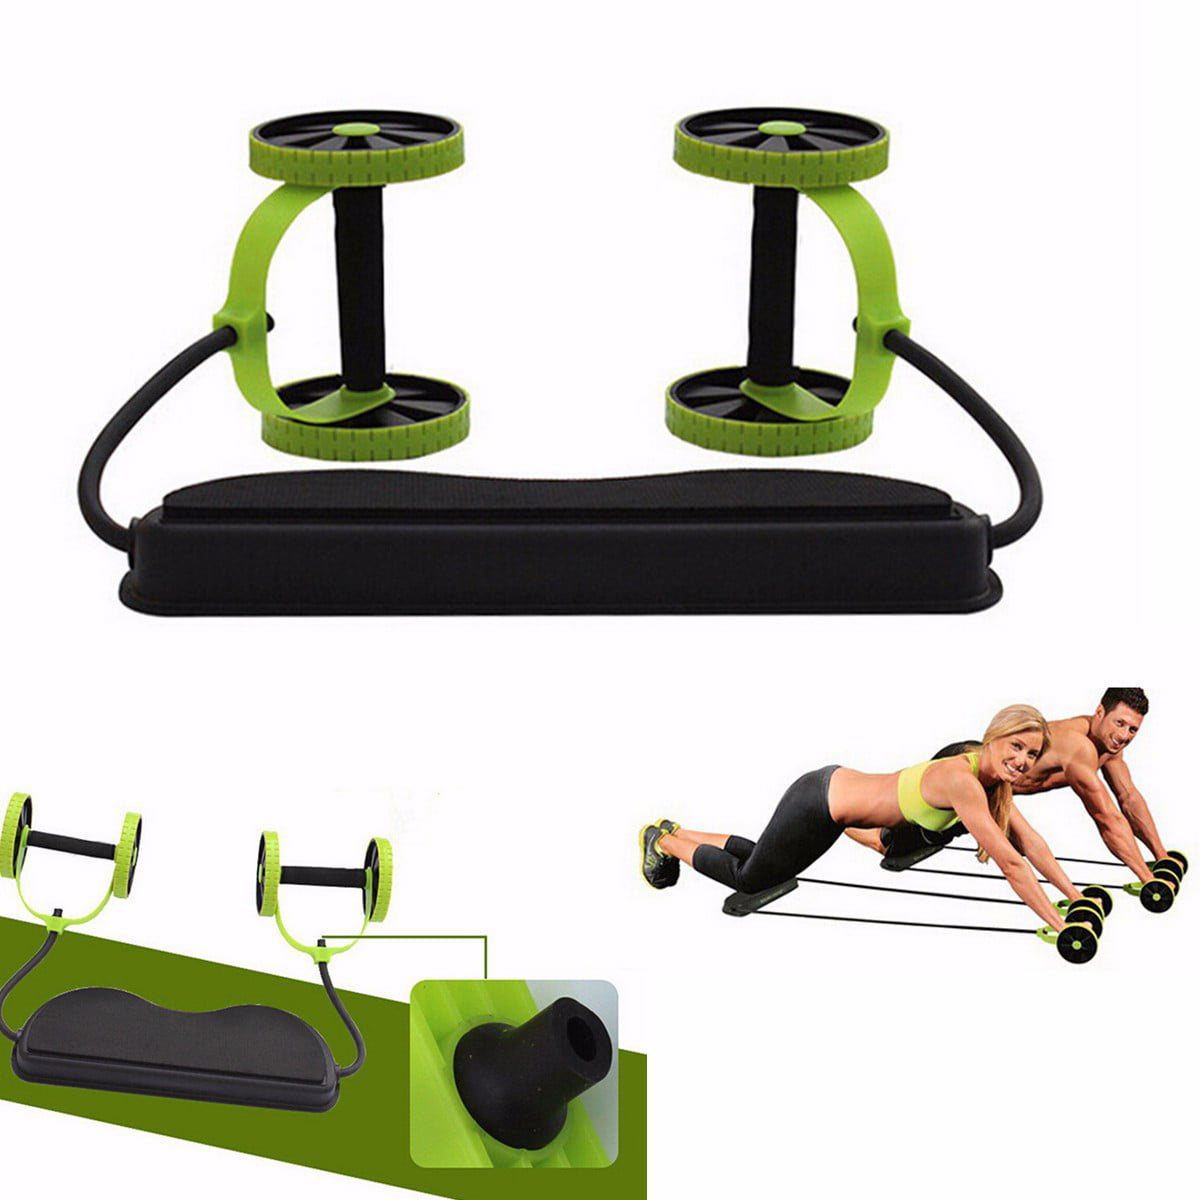 Home Gym Abs Equipment Exercise Body Fitness Abdominal Training Workout Roller 